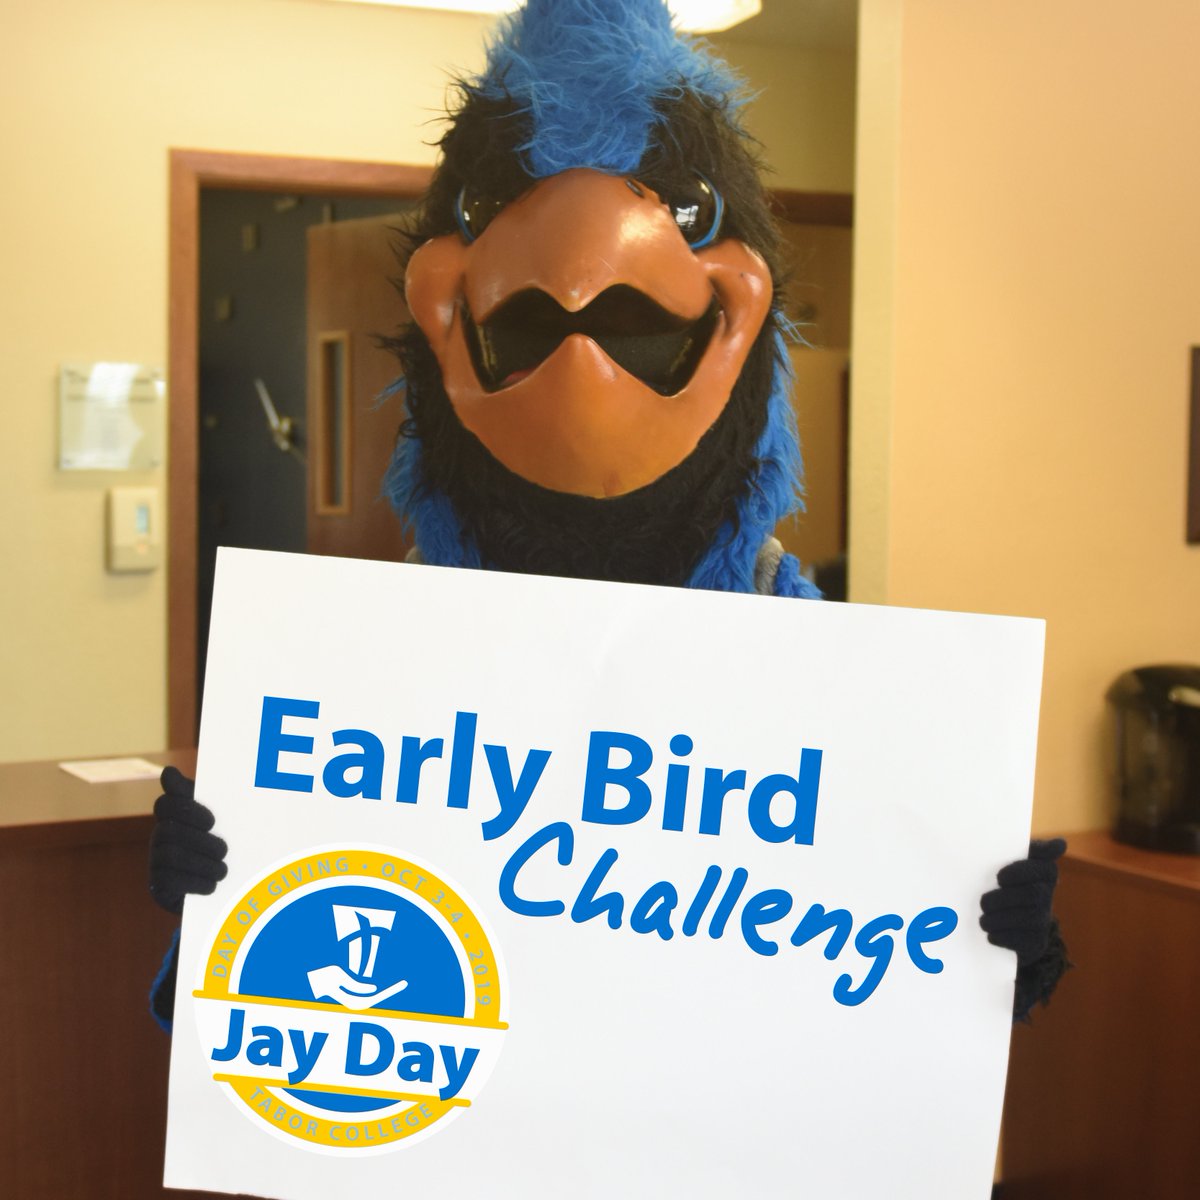 Thanks to the generosity of donors, the Early Bird Challenge for the Jay Day of Giving has begun! 100% of your donation will be matched up to $5,000! To Give go visit tabor.edu/jayday or text 'jayday' to 555888 #TaborJayDay